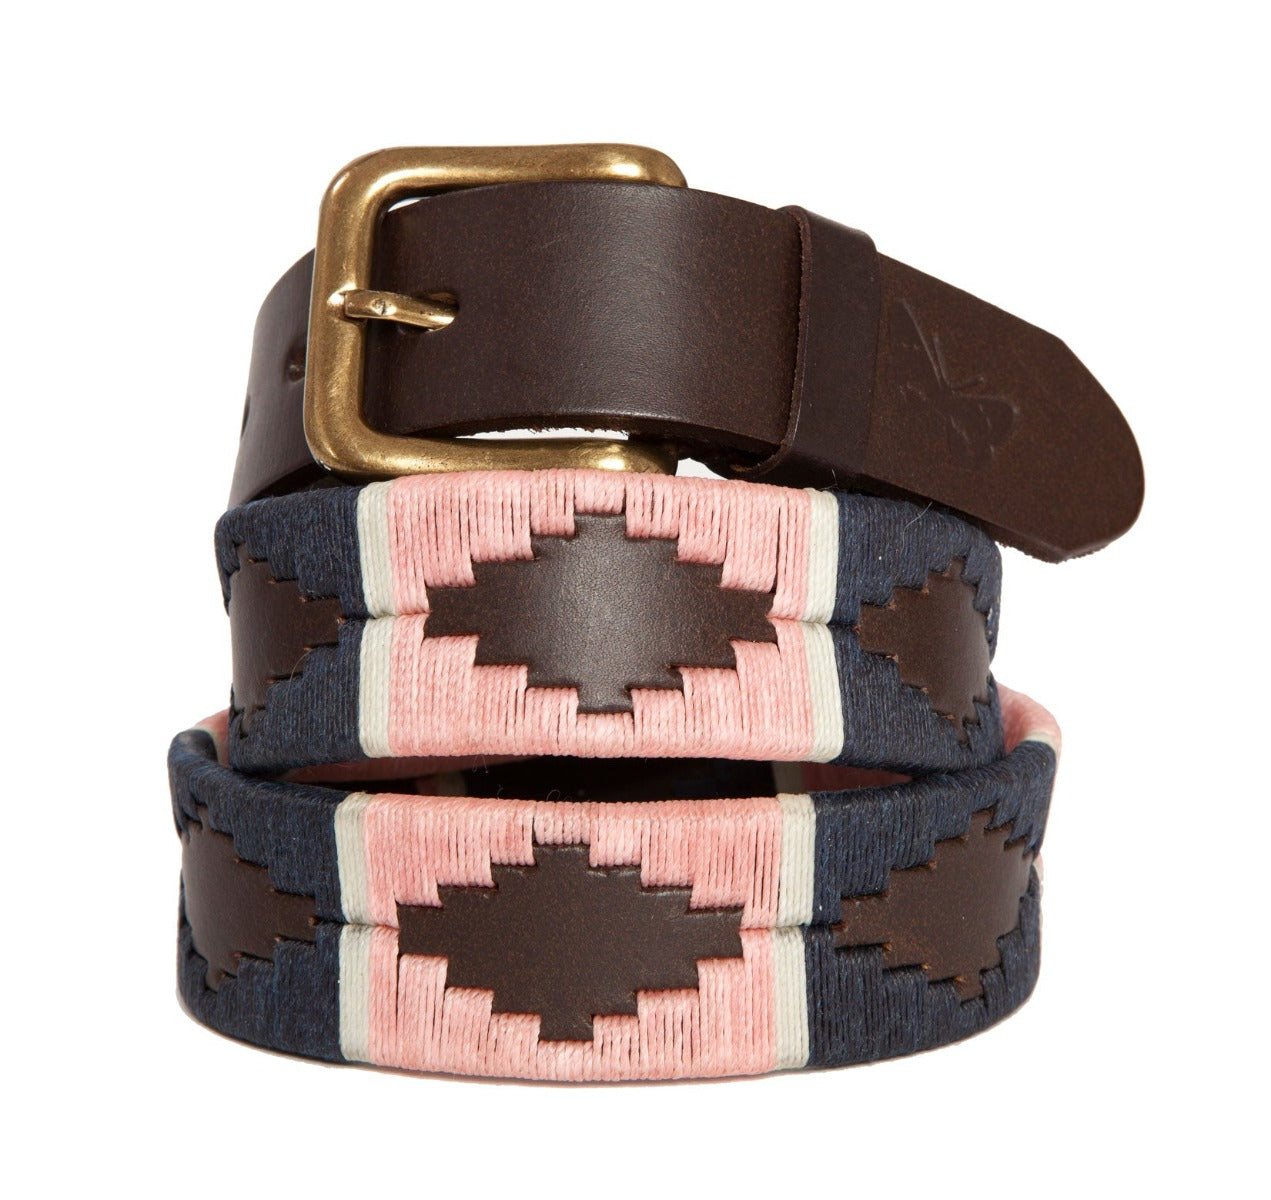 Argentinean-made embroidered leather polo belt made and designed exclusively by Regent with a 3.5cm width, brass-style buckle and hand-stitched diamond design, coming in multiple sizes.